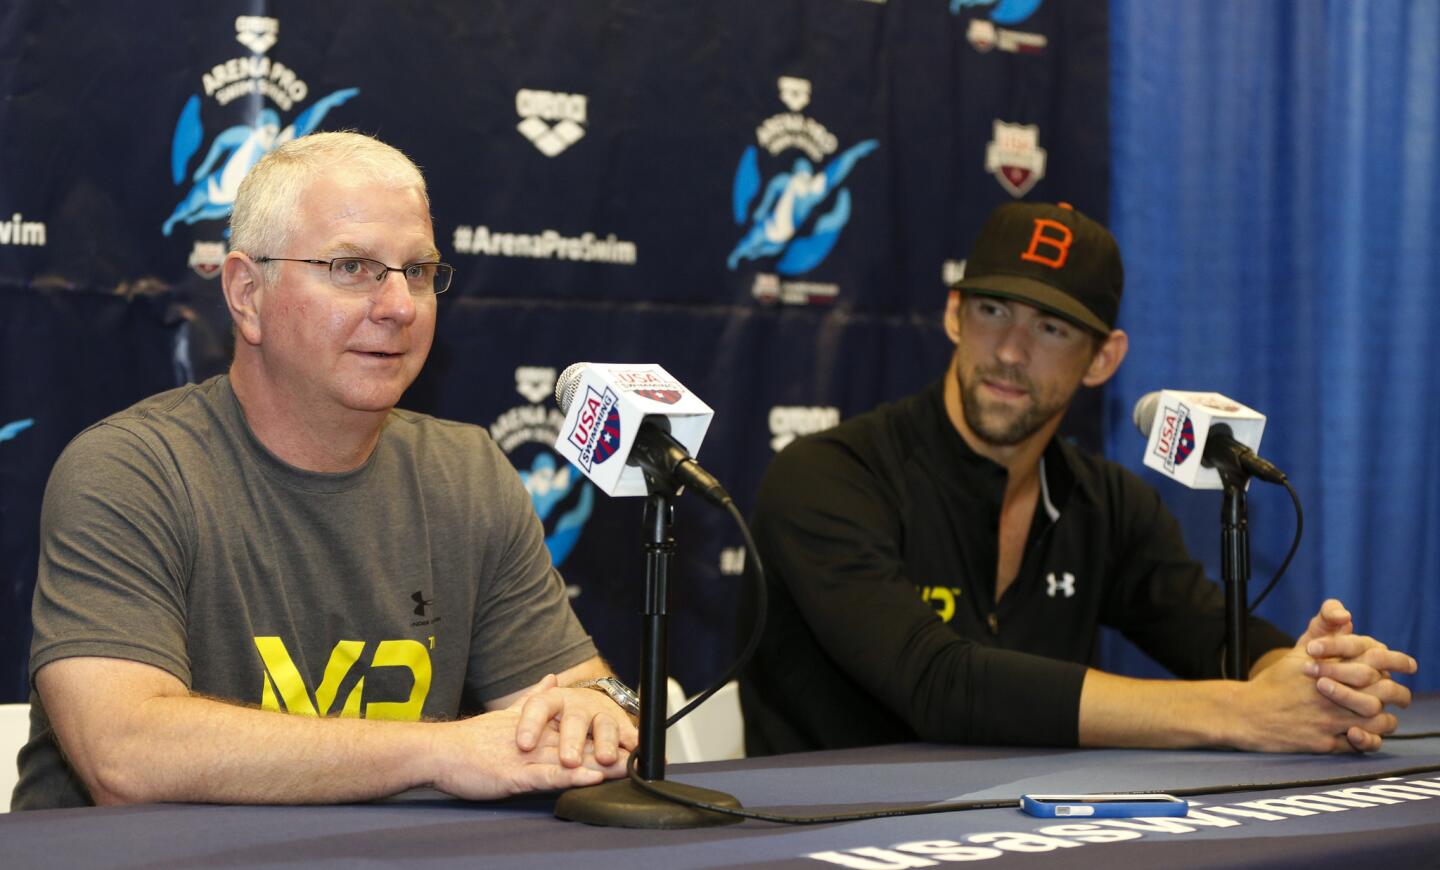 Bob Bowman, left, answers a question as Michael Phelps looks on at a news conference at the Arena Pro Swim Series swim meet in Charlotte, N.C.